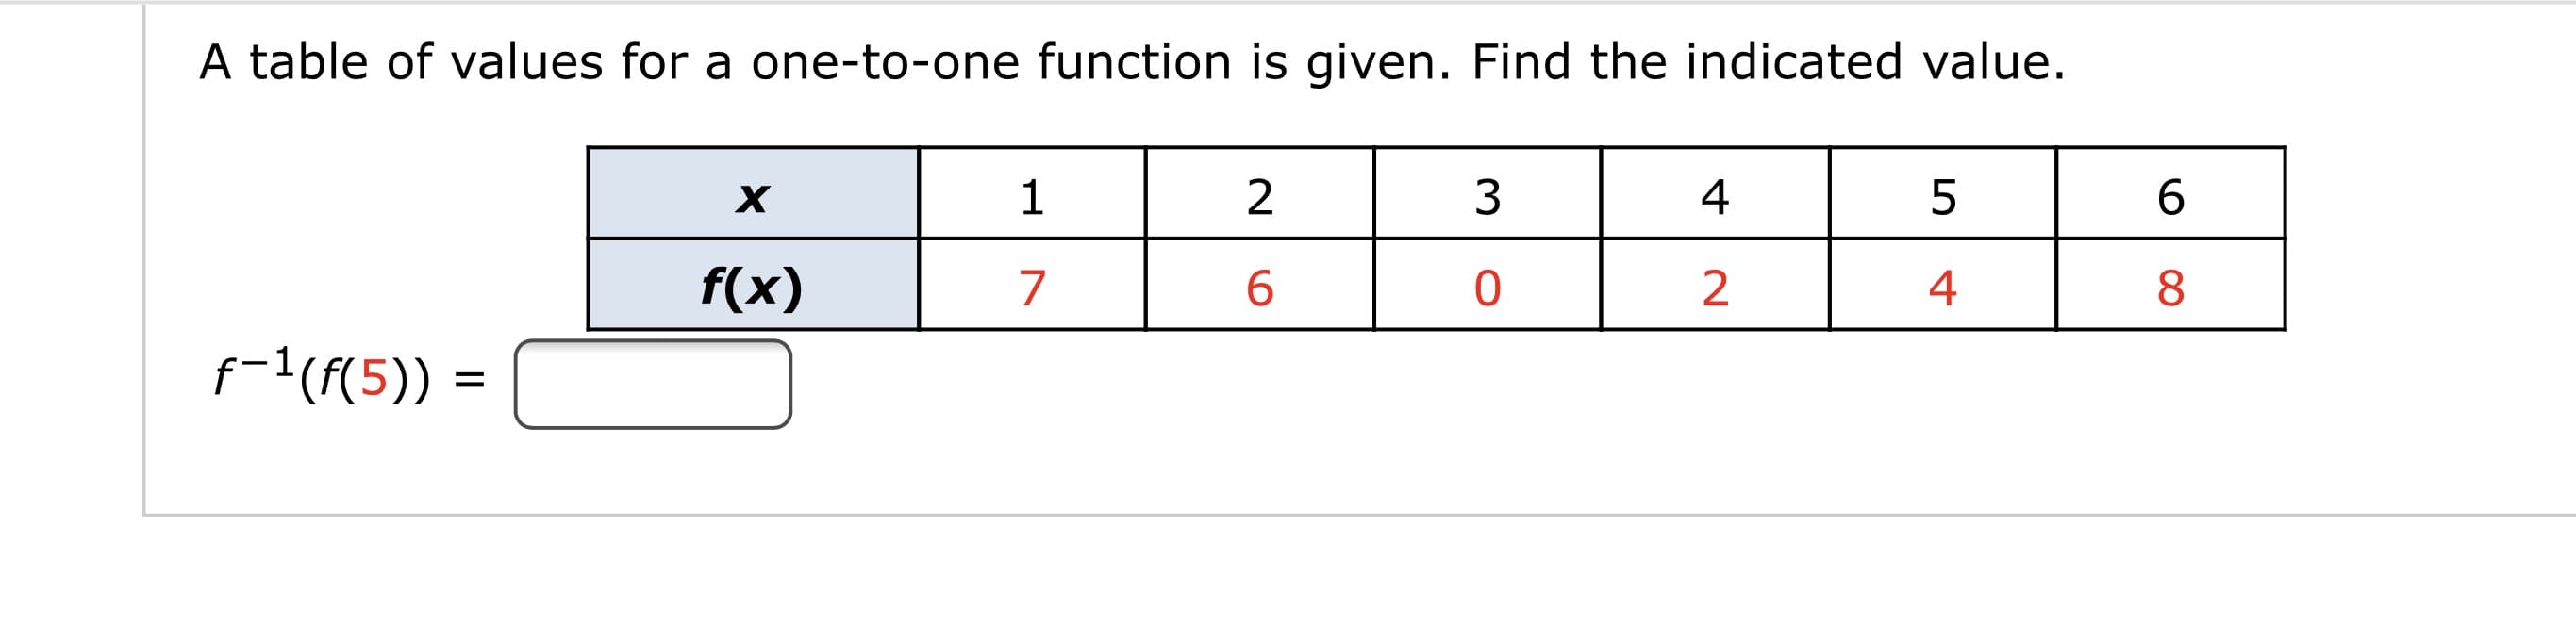 A table of values for a one-to-one function is given. Find the indicated value.
х
4
6.
f(x)
6.
4
8
f-1(f(5)) =
